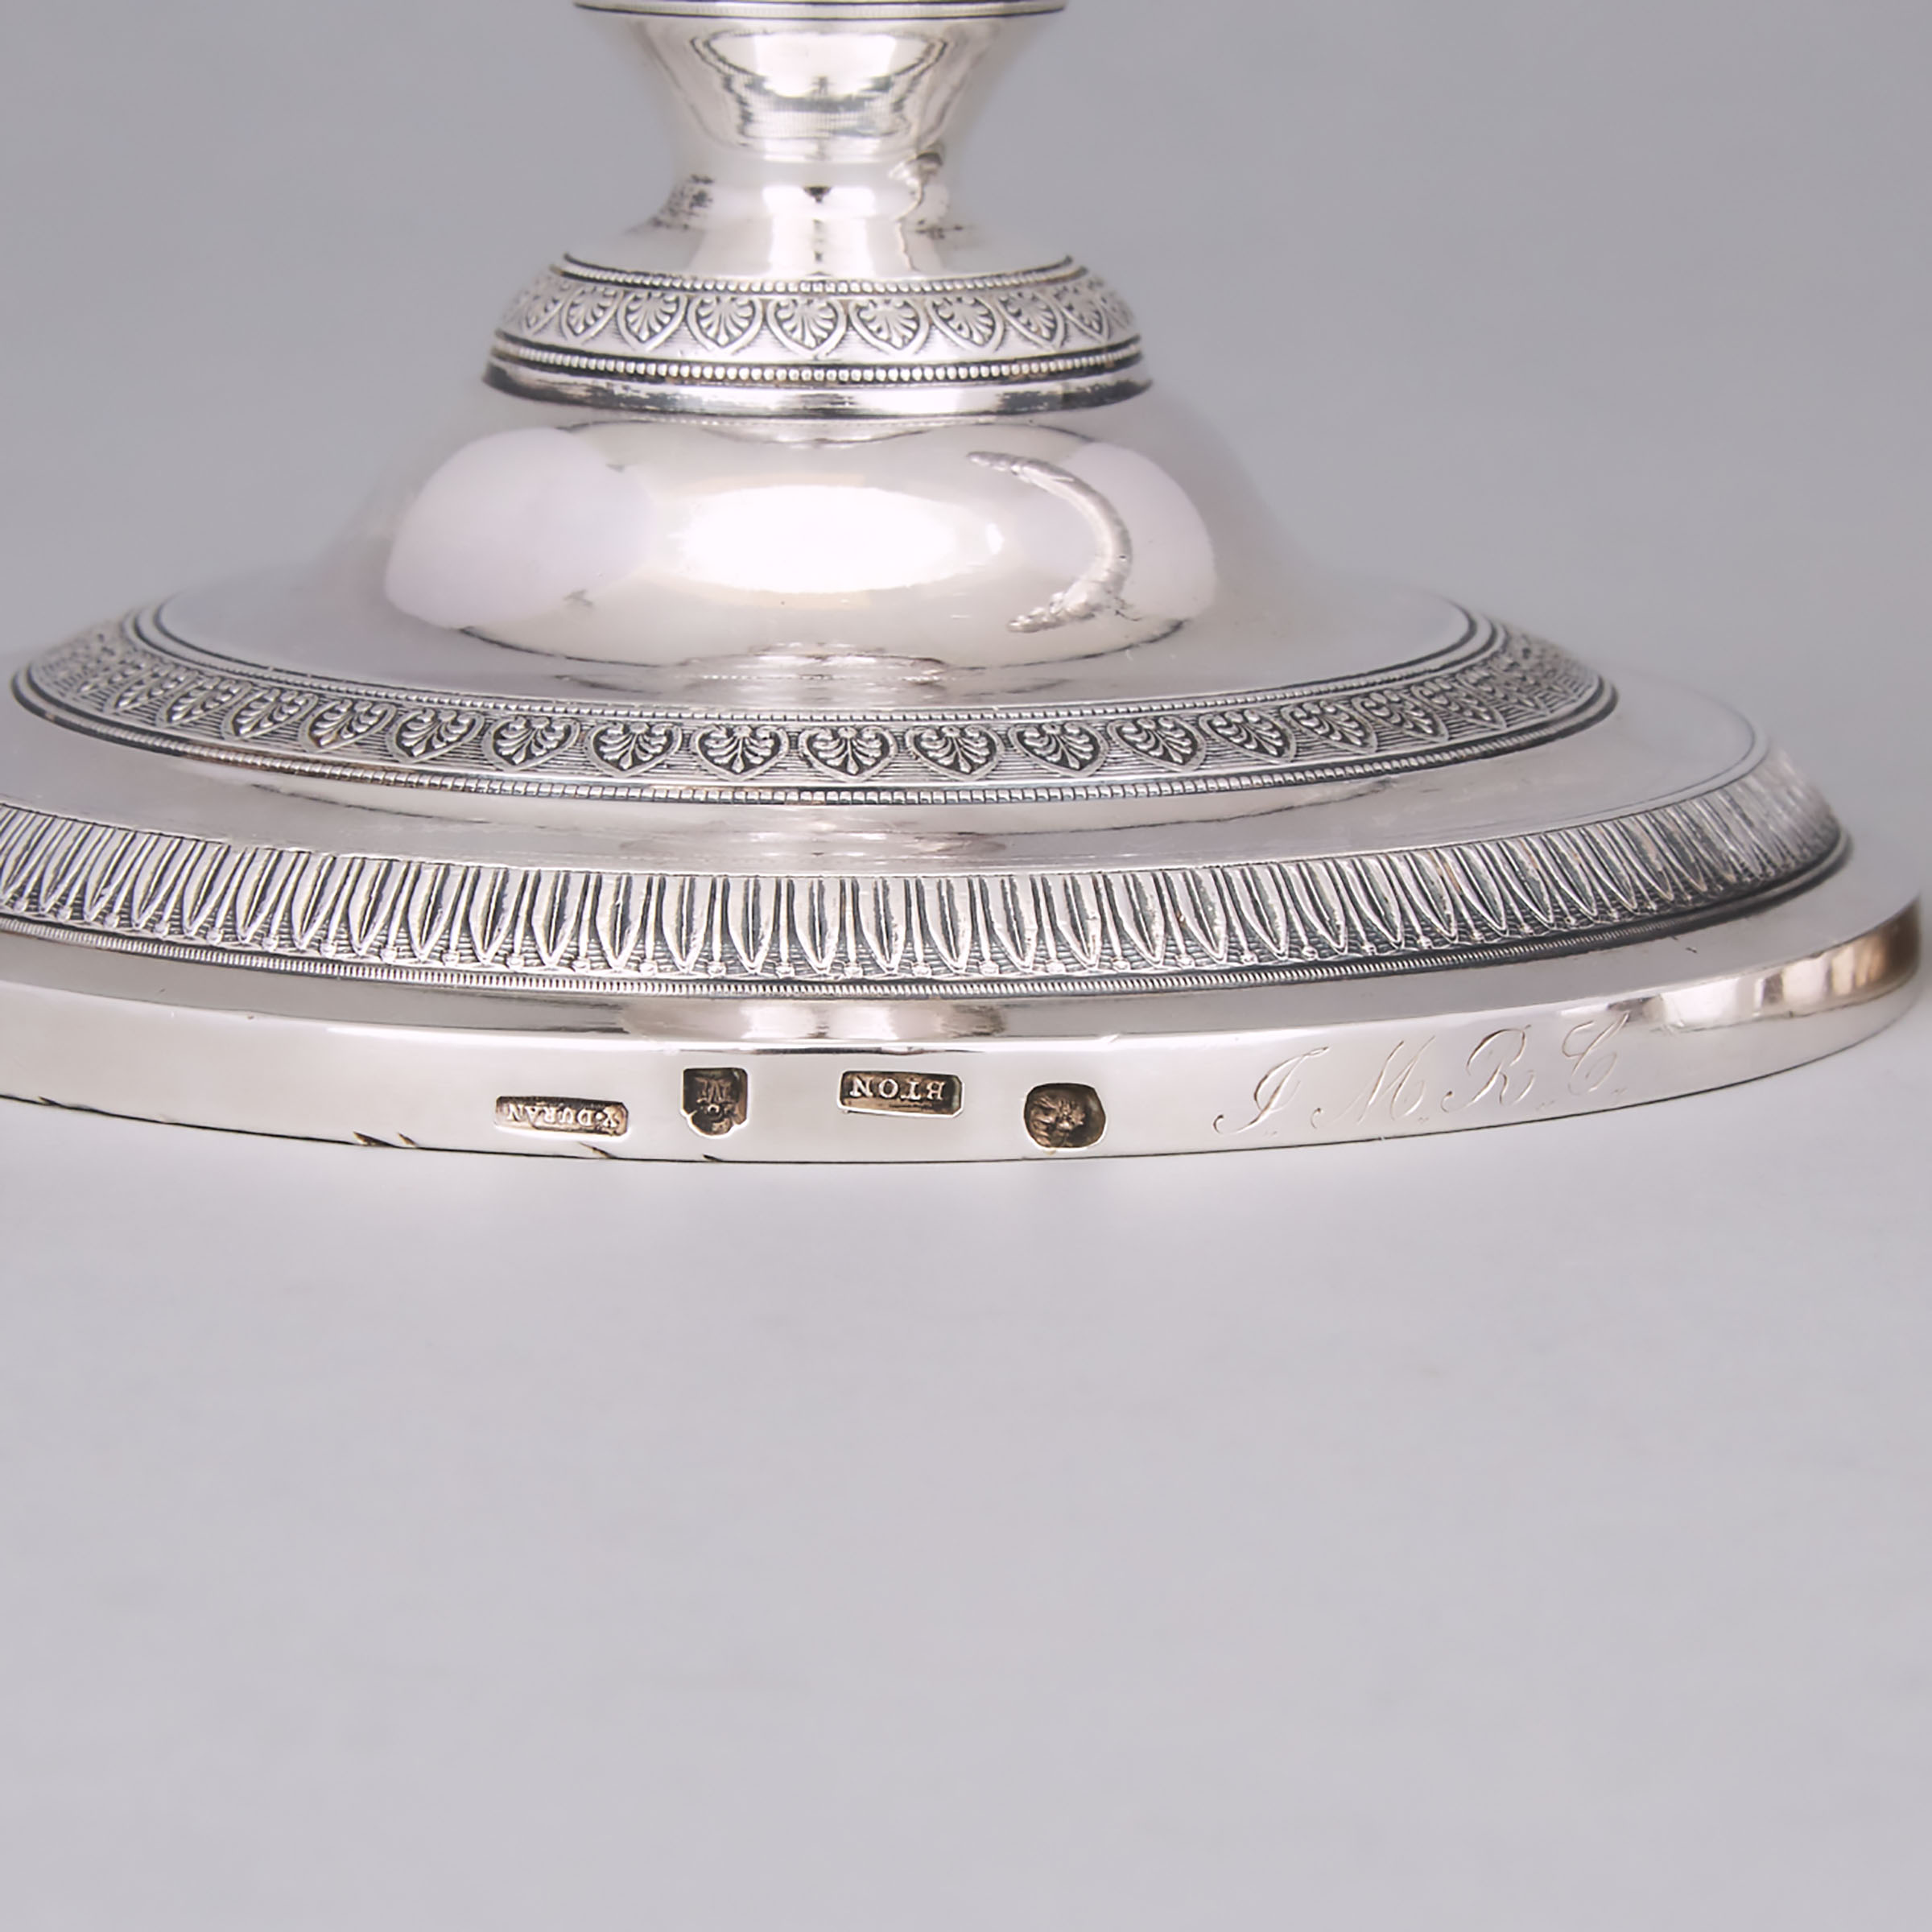 Pair of Mexican Silver Table Candlesticks, Y. Duran, Mexico City, c.1830